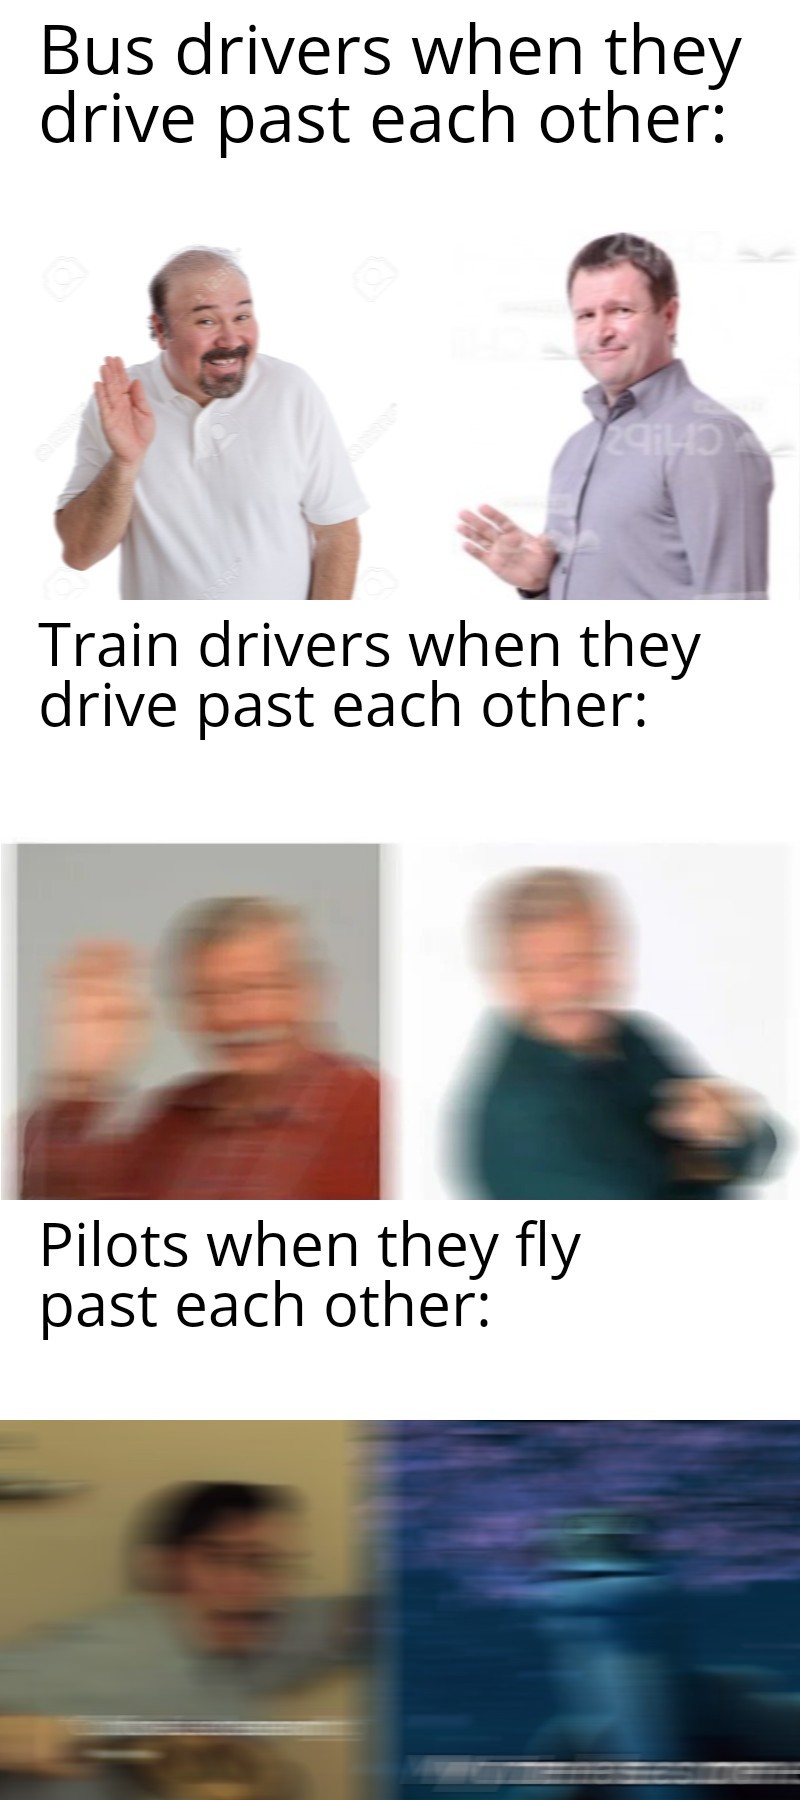 humpday - shoulder - Bus drivers when they drive past each other Train drivers when they drive past each other Pilots when they fly past each other